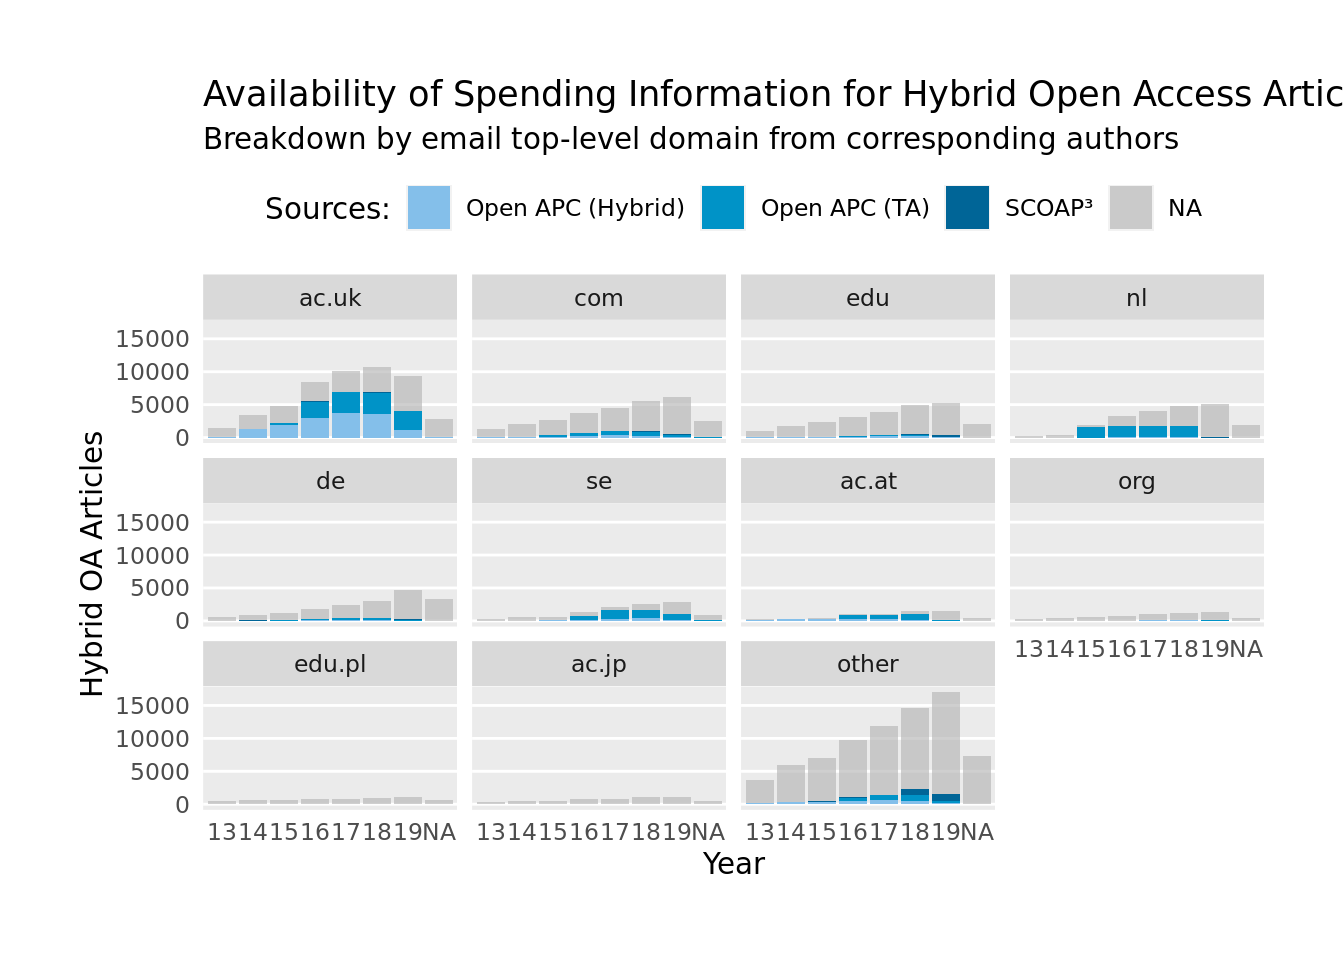 Availability of spending information